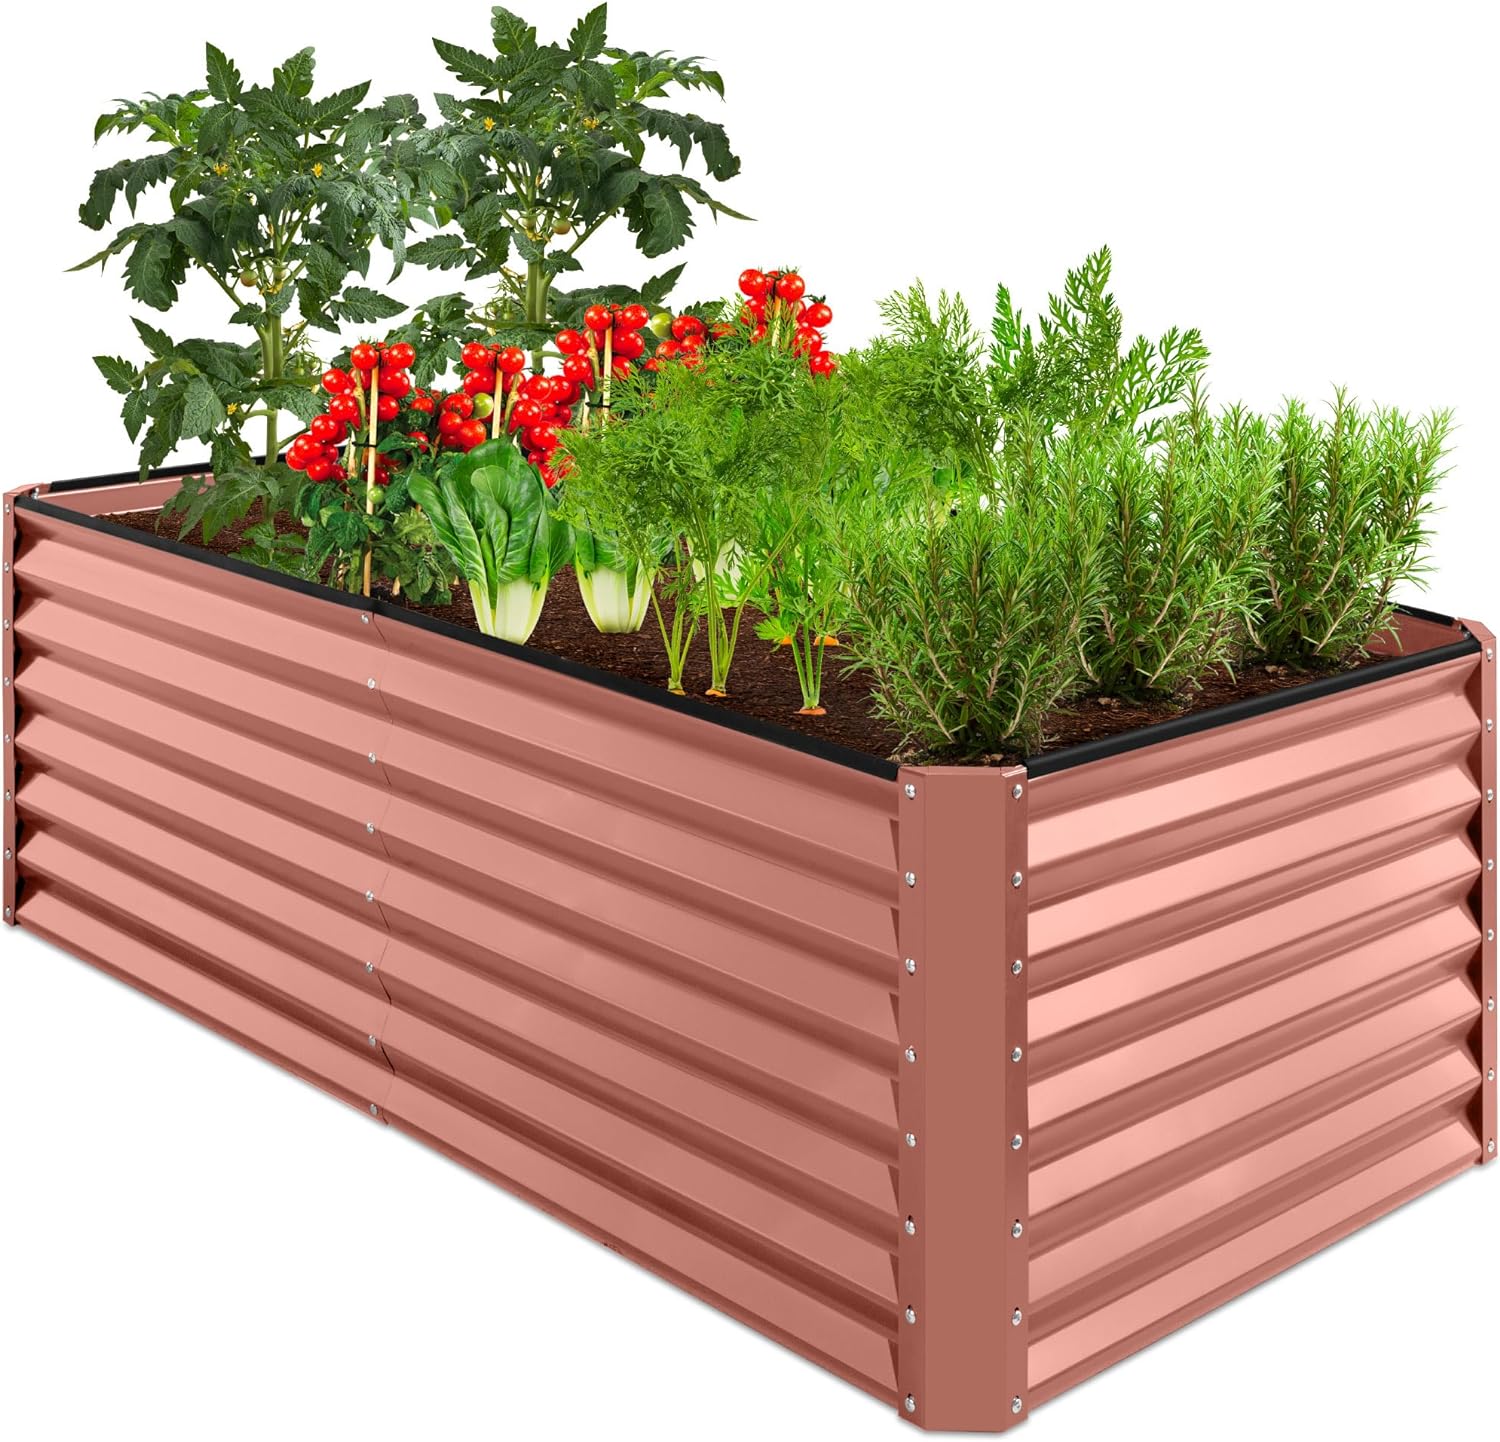 Best Choice Products Raised Vegetable Garden Bed